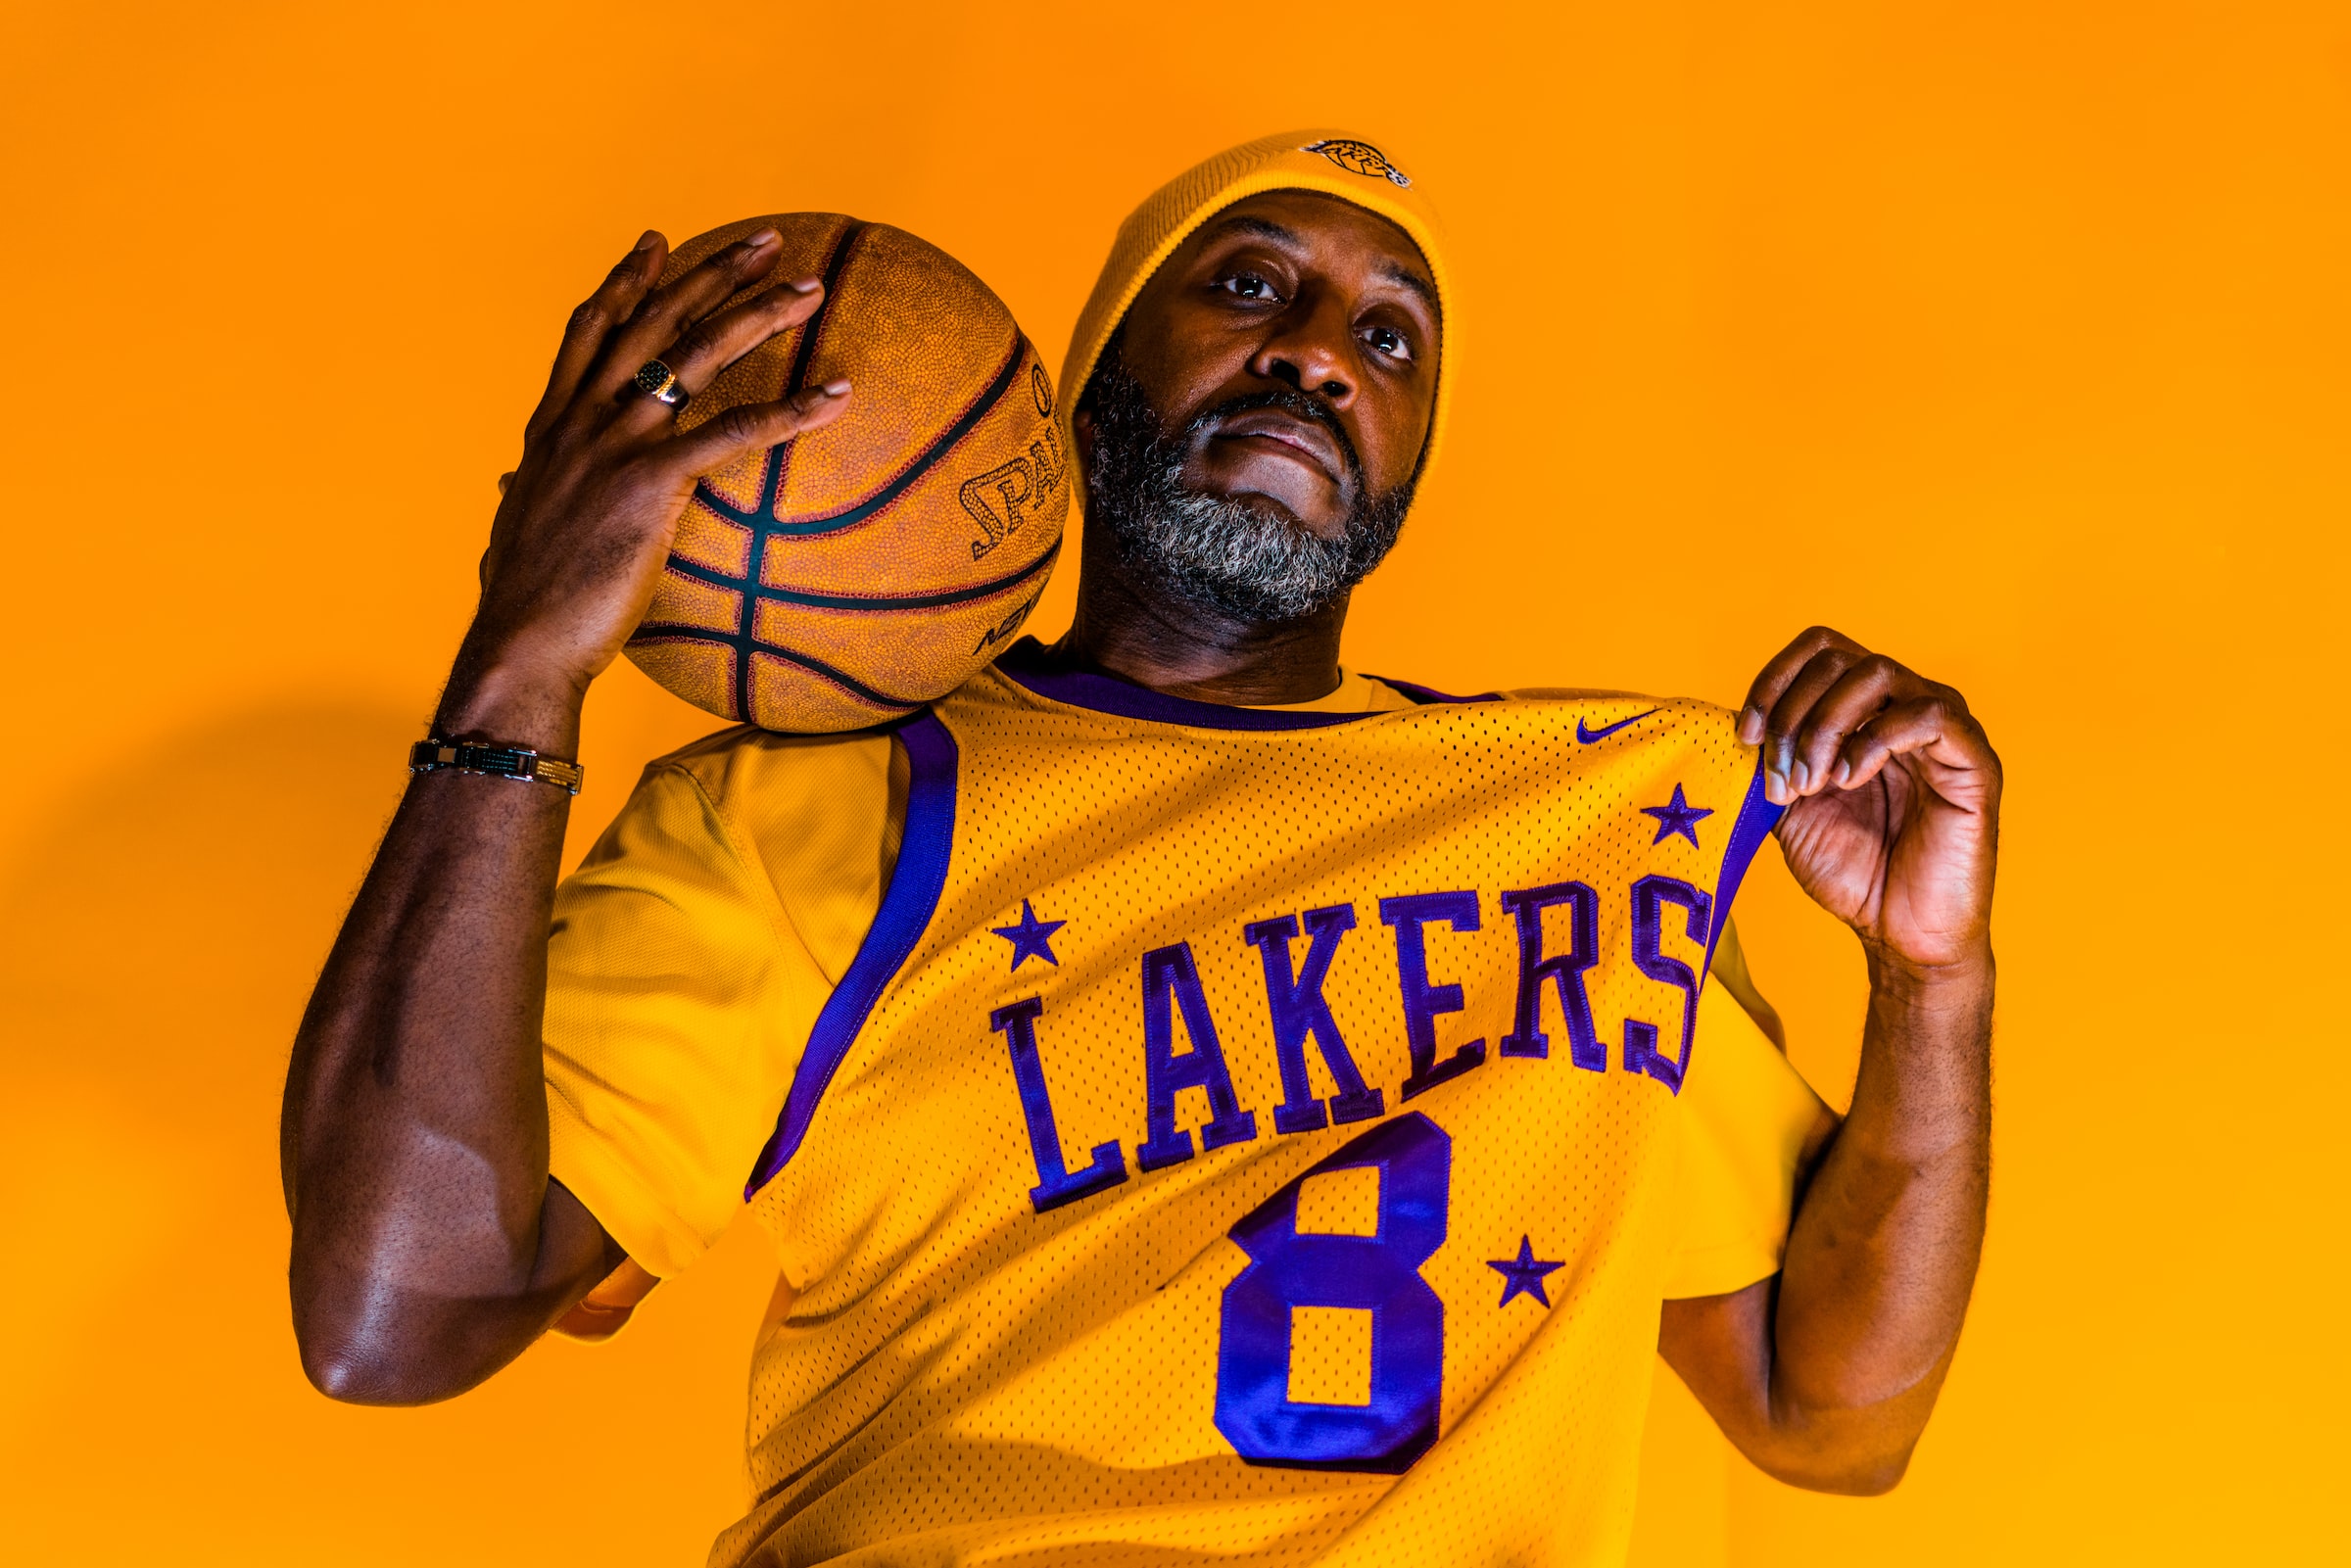 Lakers fan posing with a ball